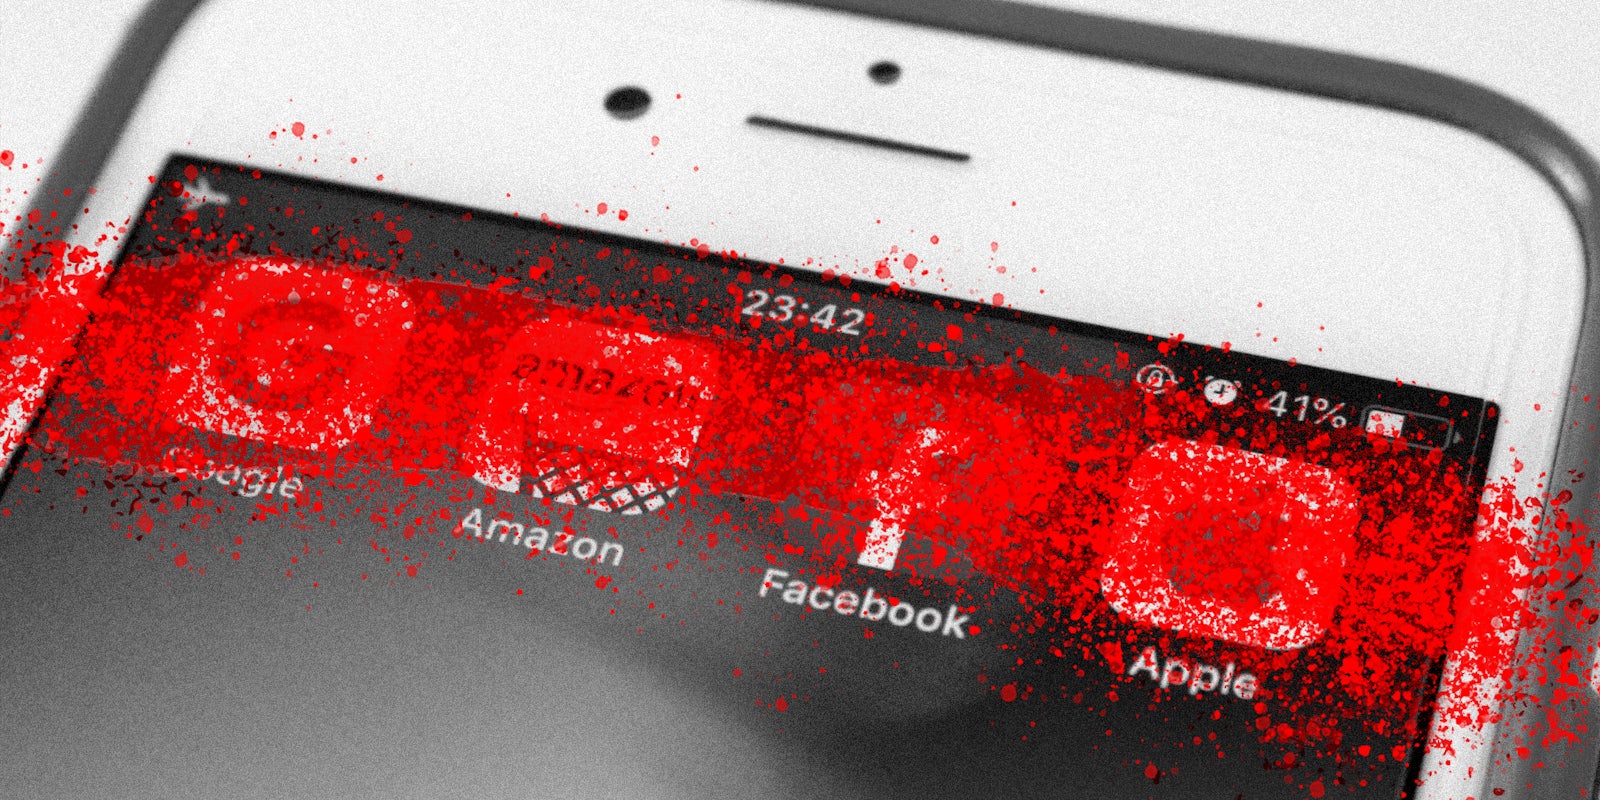 phone screen with Google, Amazon, Facebook, and Apple app icons, red paint splatter